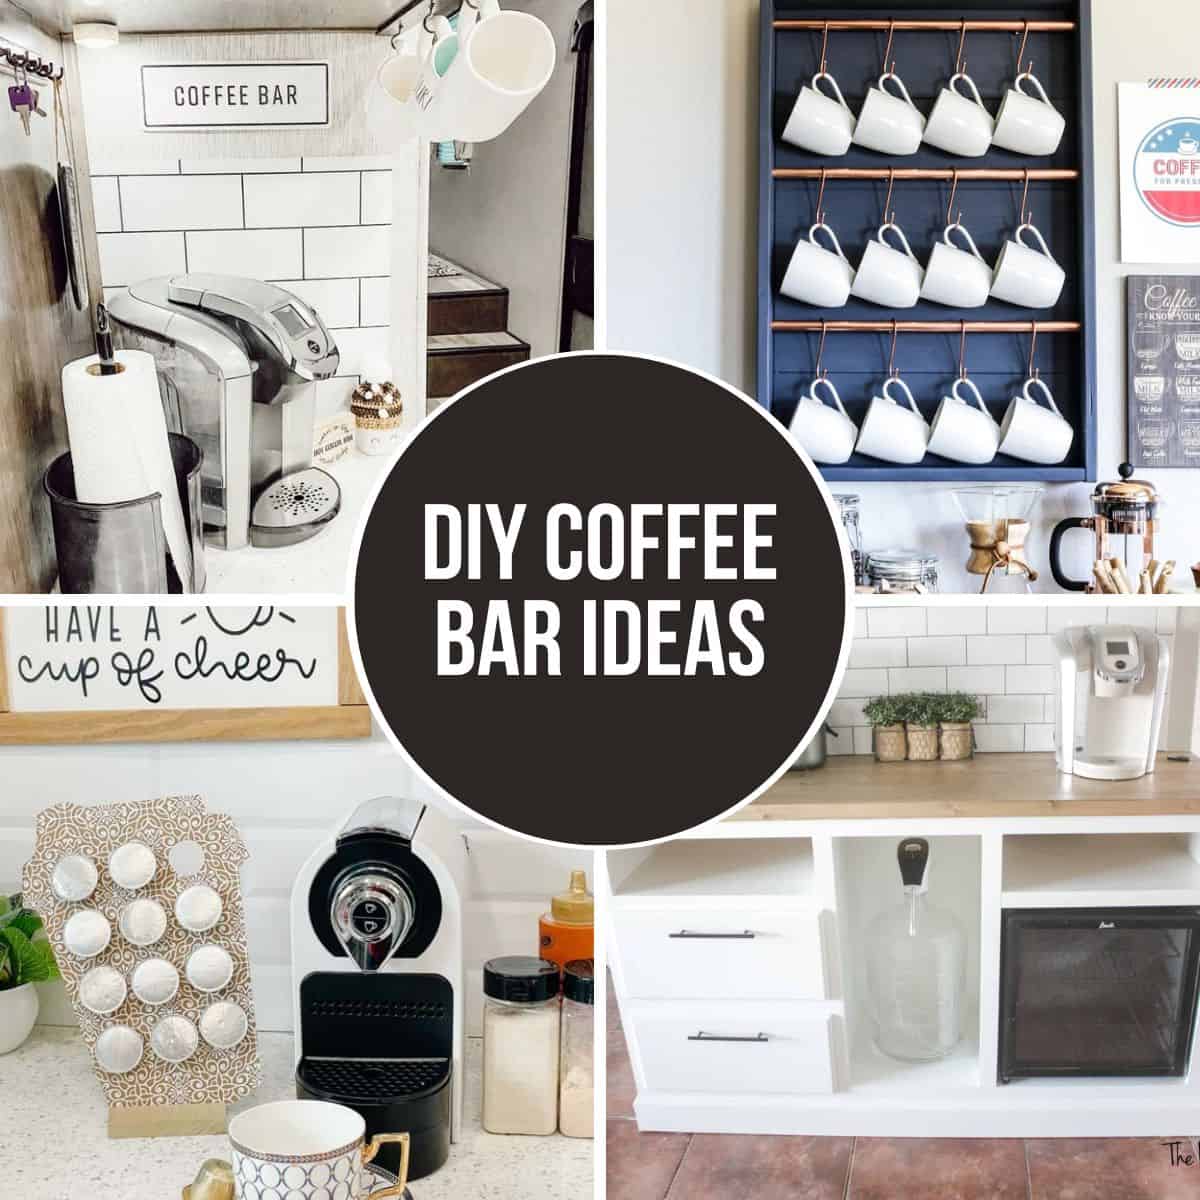 Image collage of four coffee bars with text overlay "DIY Coffee Bar Ideas"